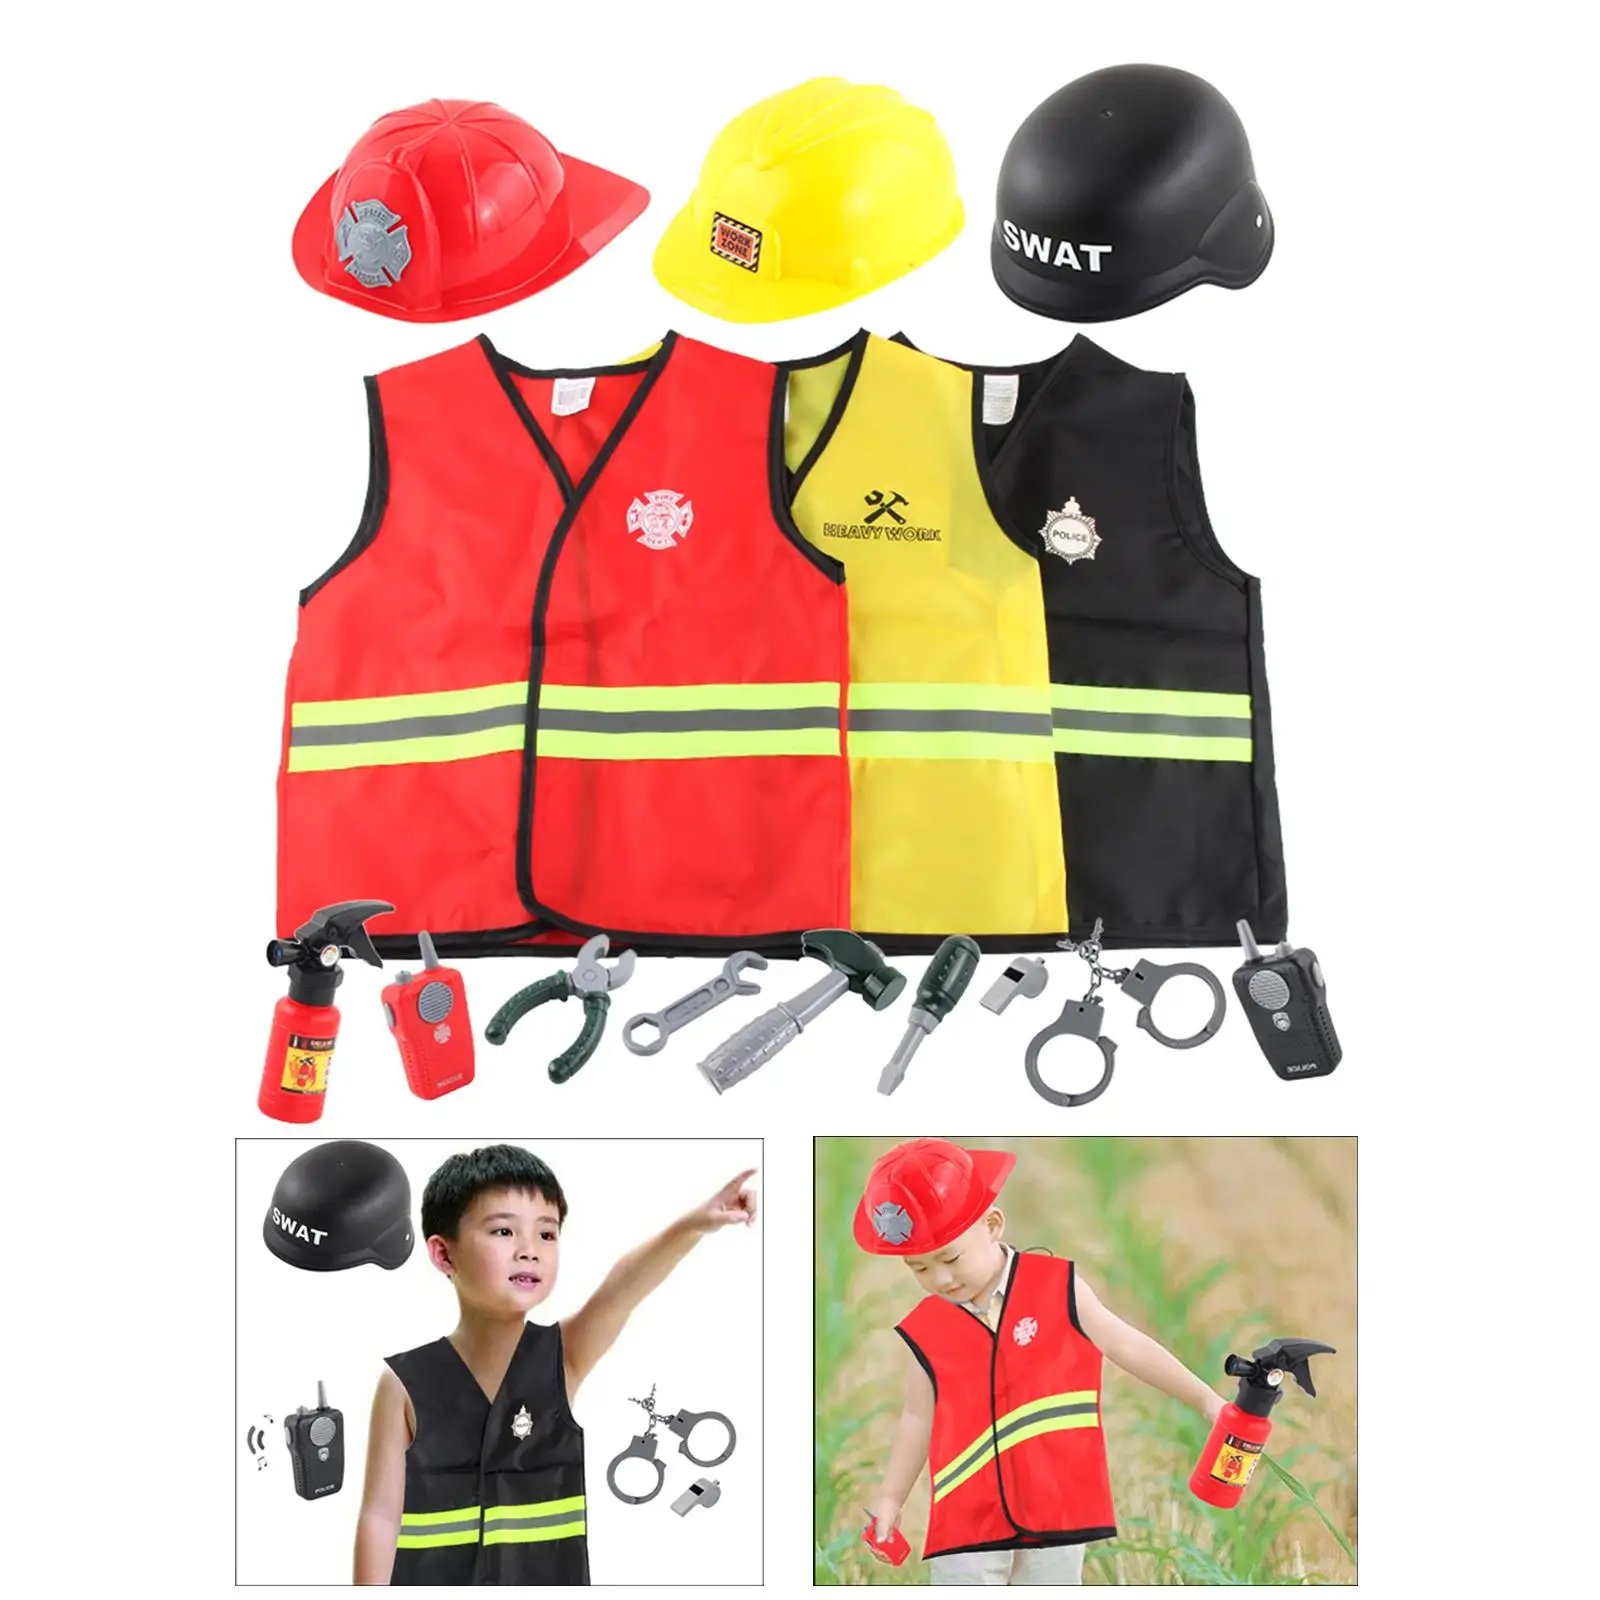 Cute Fireman Costume  Uniform Clothes for Carnival Christmas Toddlers